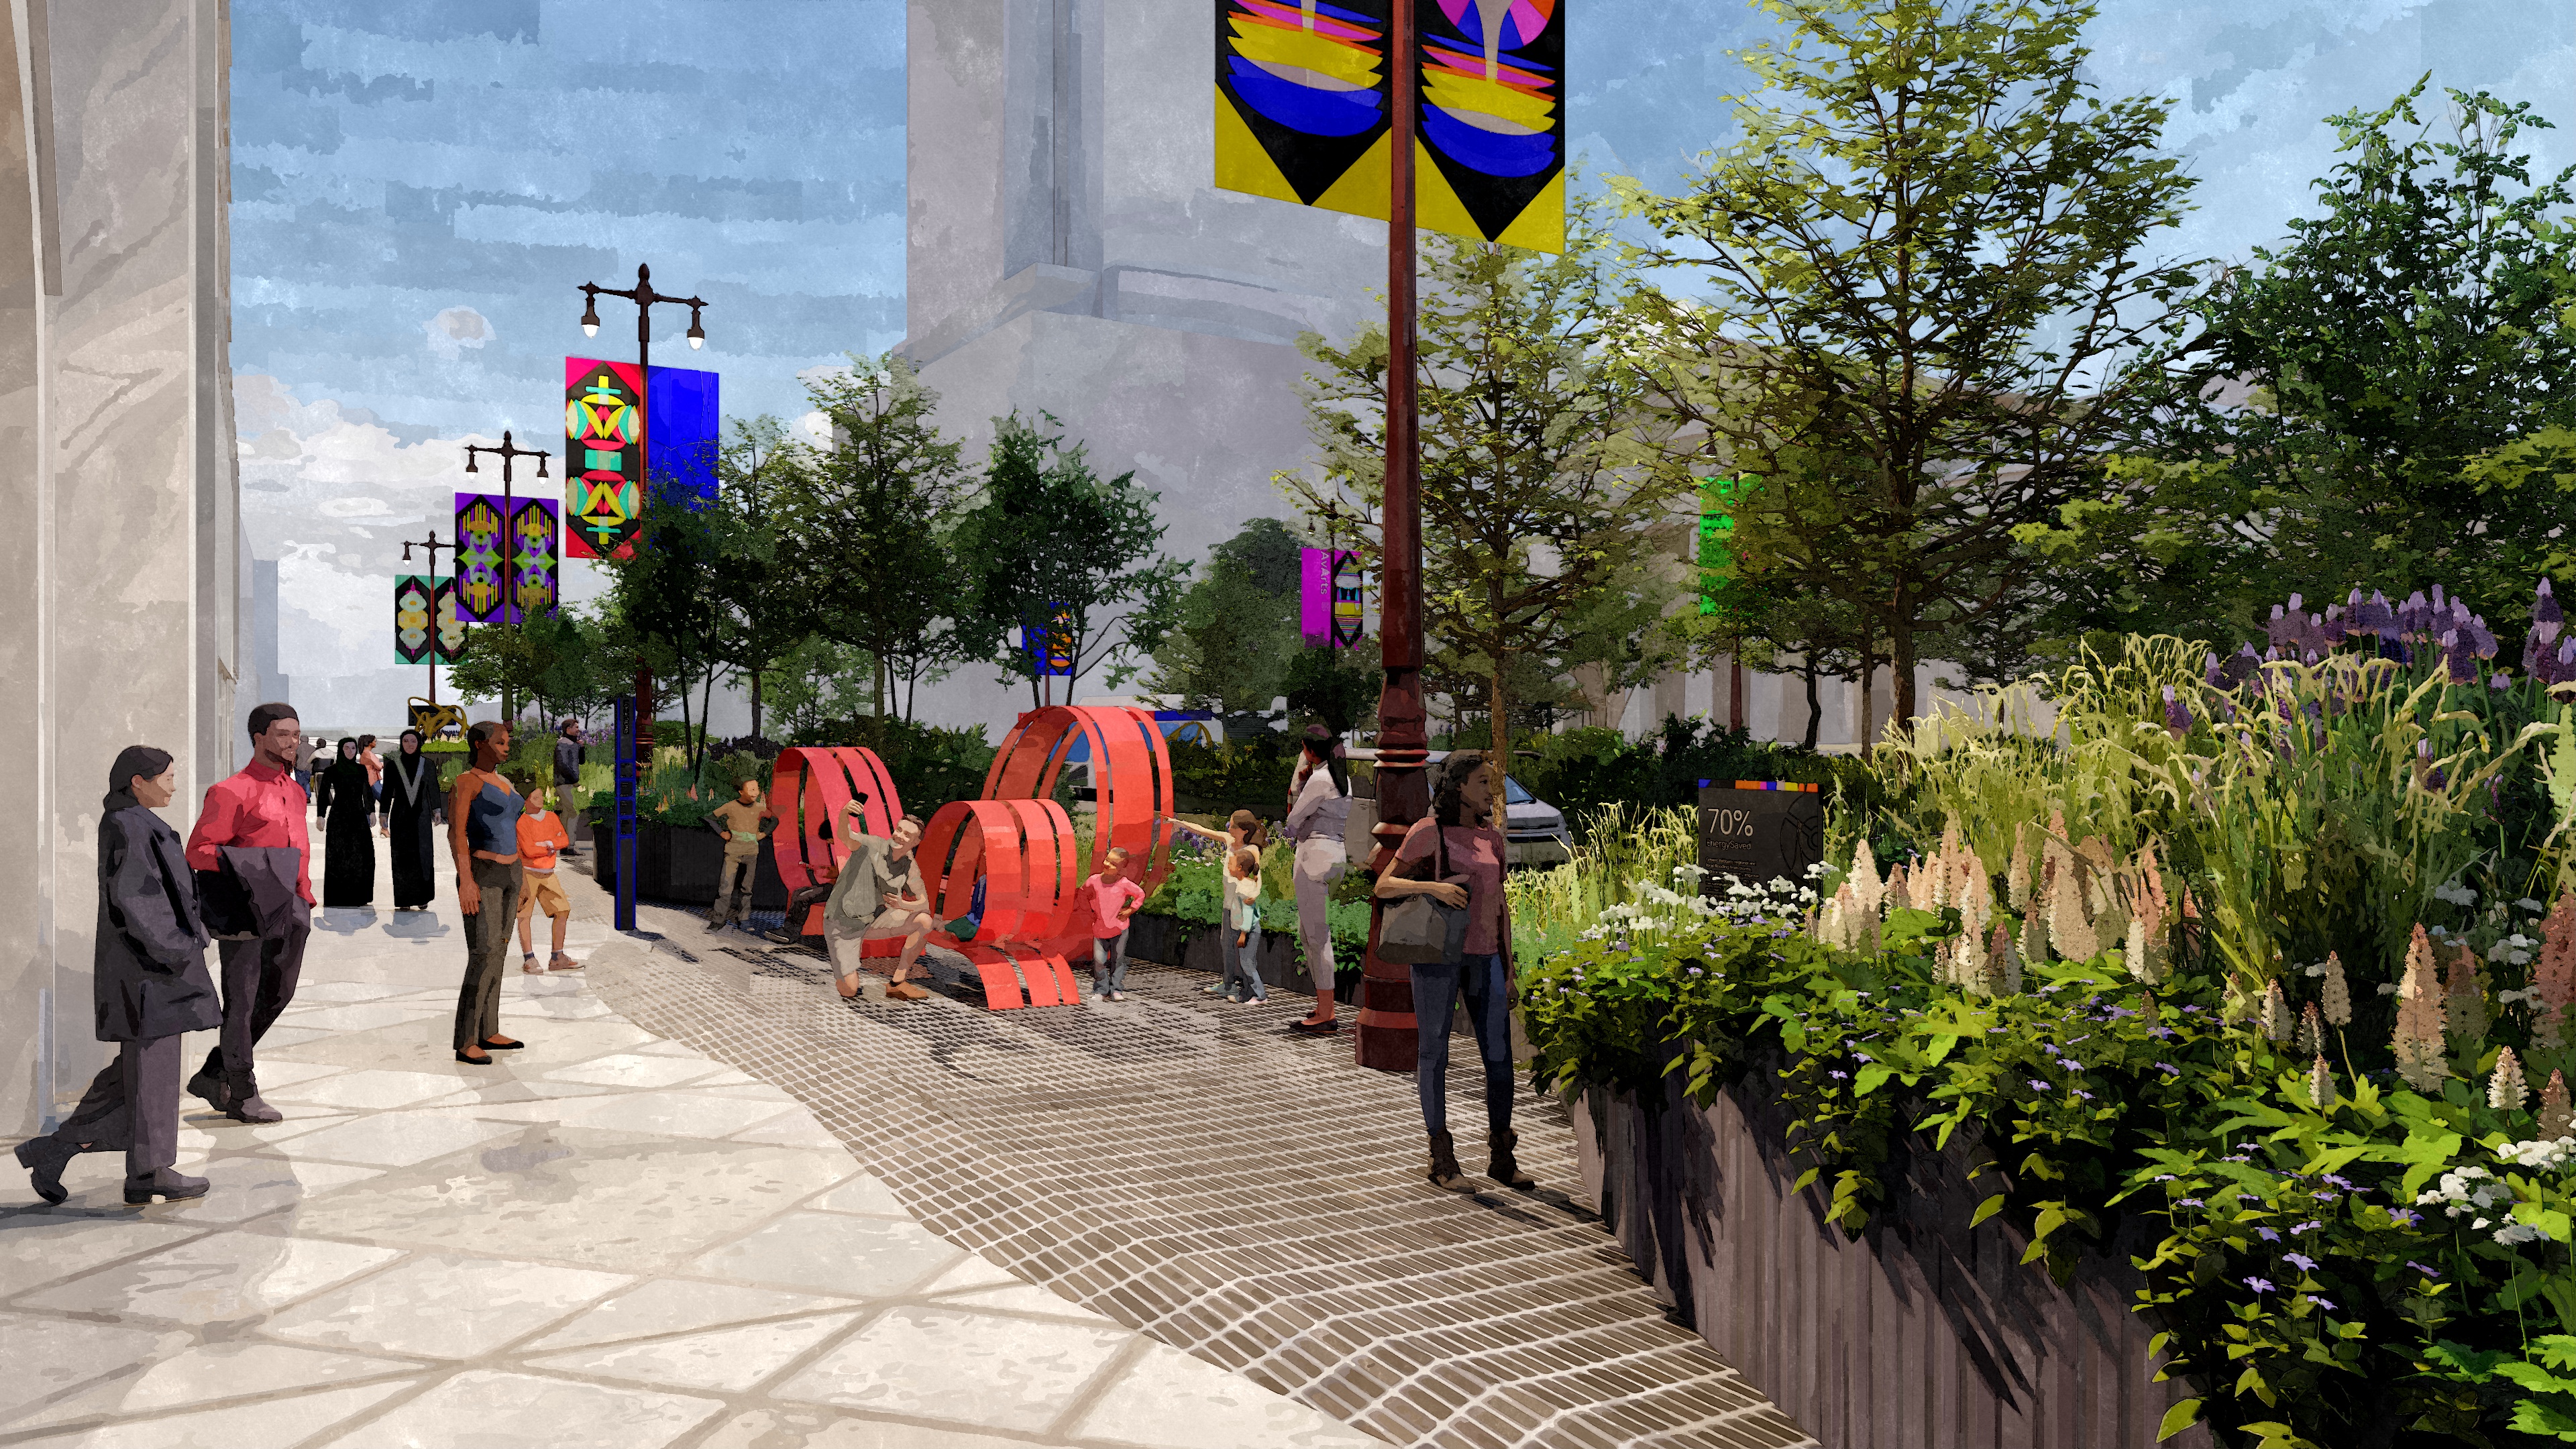 Artist's rendering shows vision to transform part of Philadelphia's Avenue of the Arts.